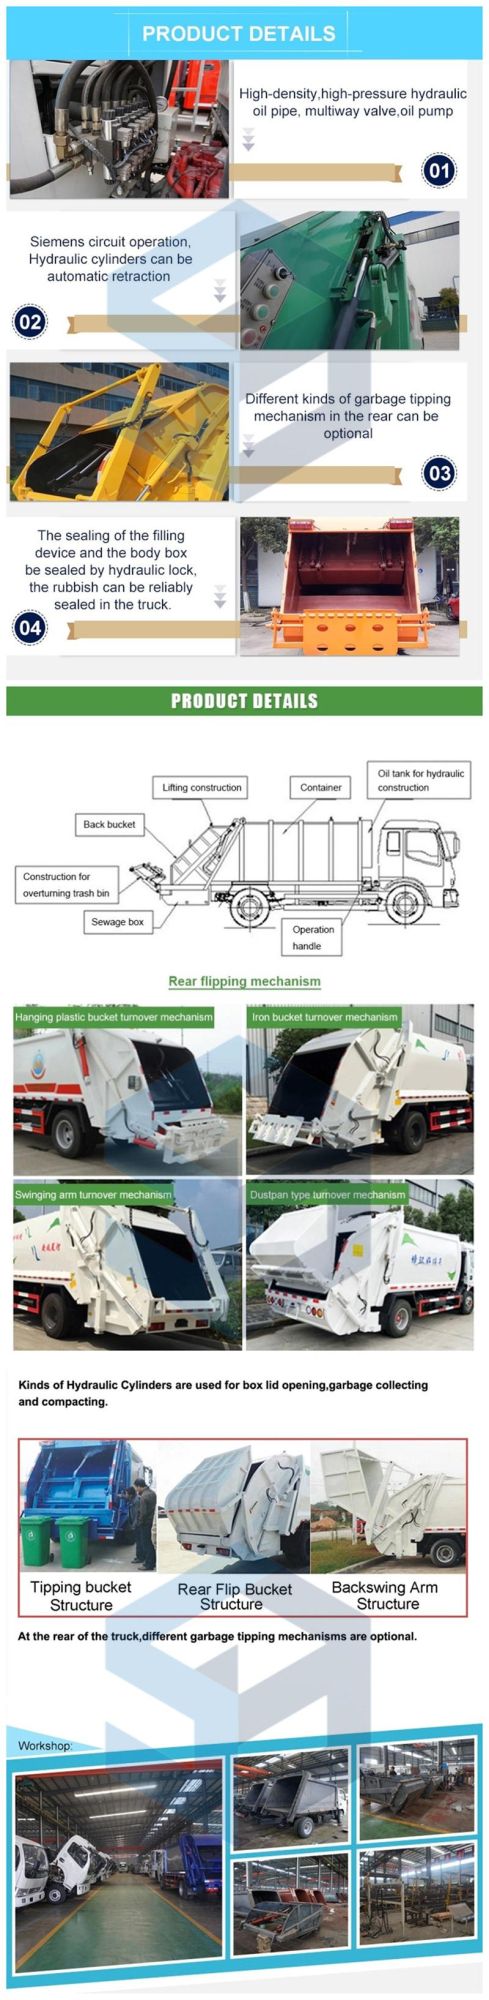 16cbm Refuse Collection Vehicle Dongfeng Garbage Waste Compactor Collector Trucks Price